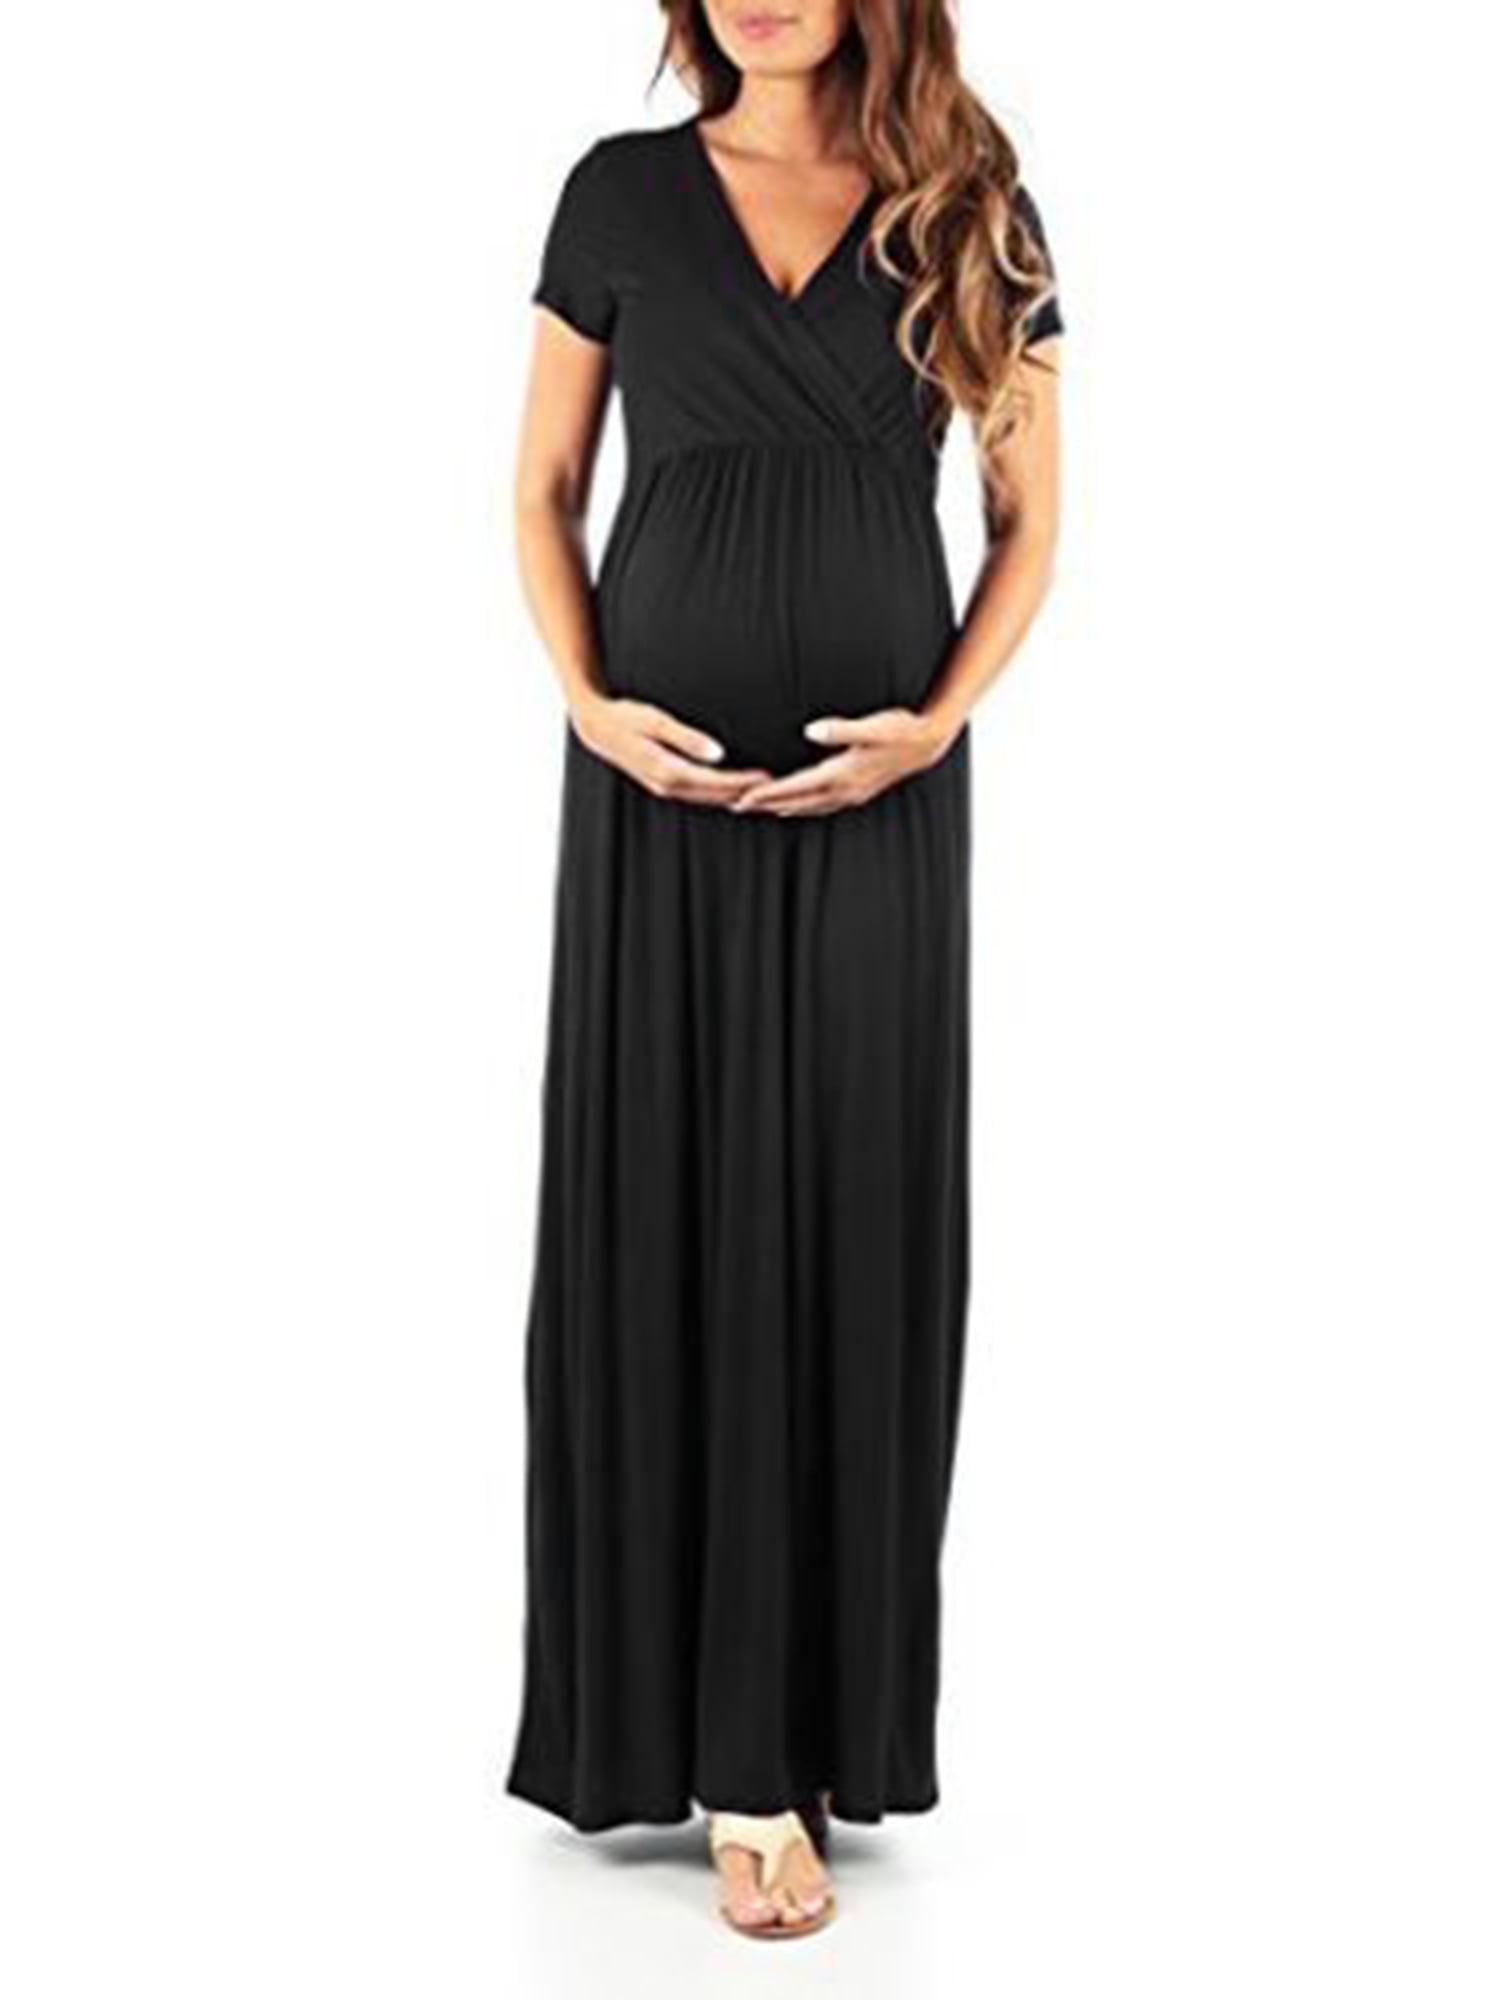 Sexy Dance Maternity Maxi Dress Pregnant Women Long Gown Wrap Photography Photo Shoot Props V 